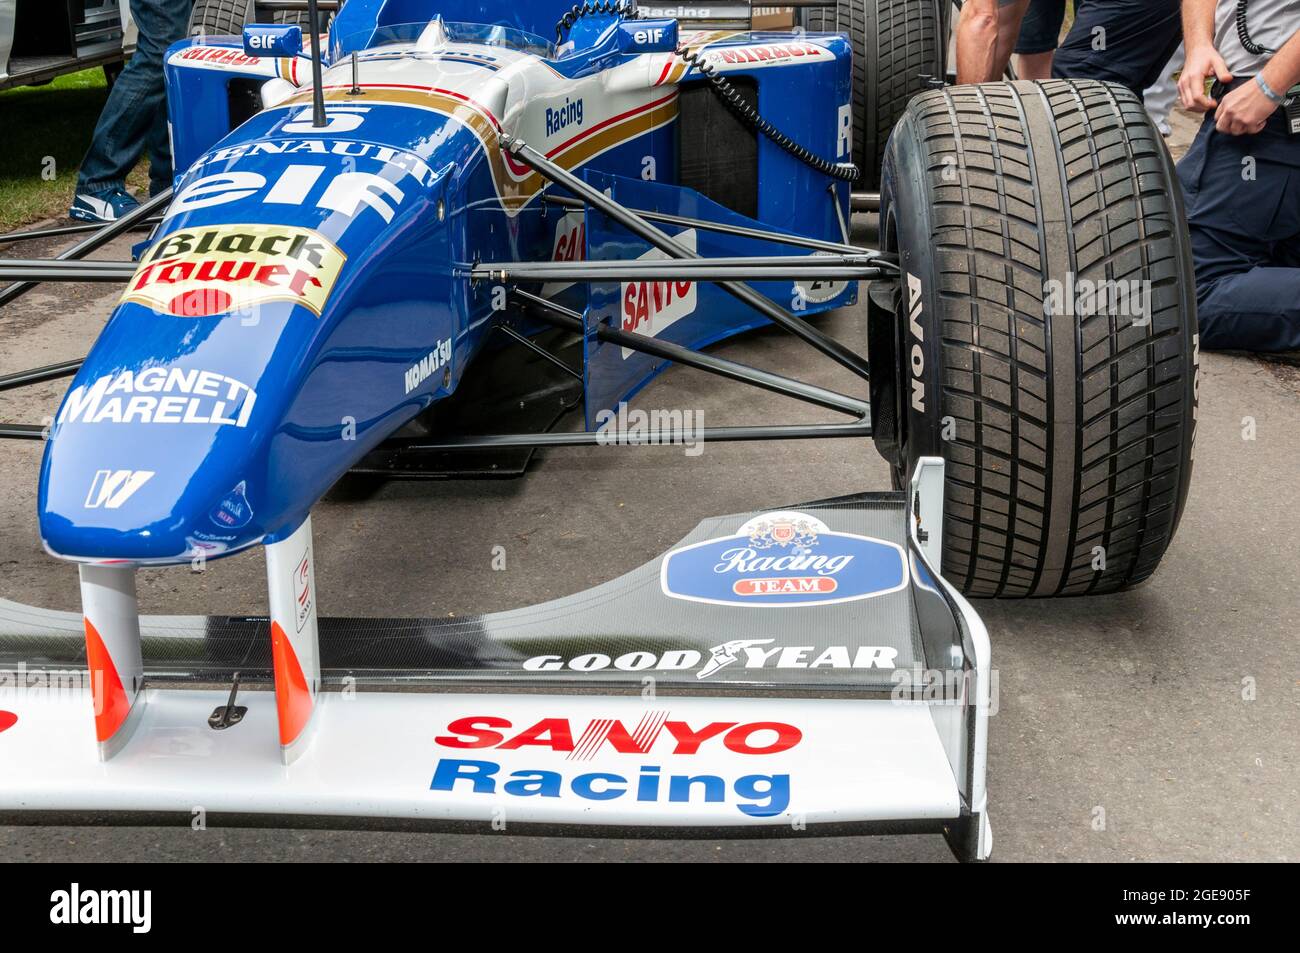 Williams FW18 Formula 1, Grand Prix racing car  at the Goodwood Festival of Speed motor racing event 2014. Front wing detail. Sanyo racing advertising Stock Photo